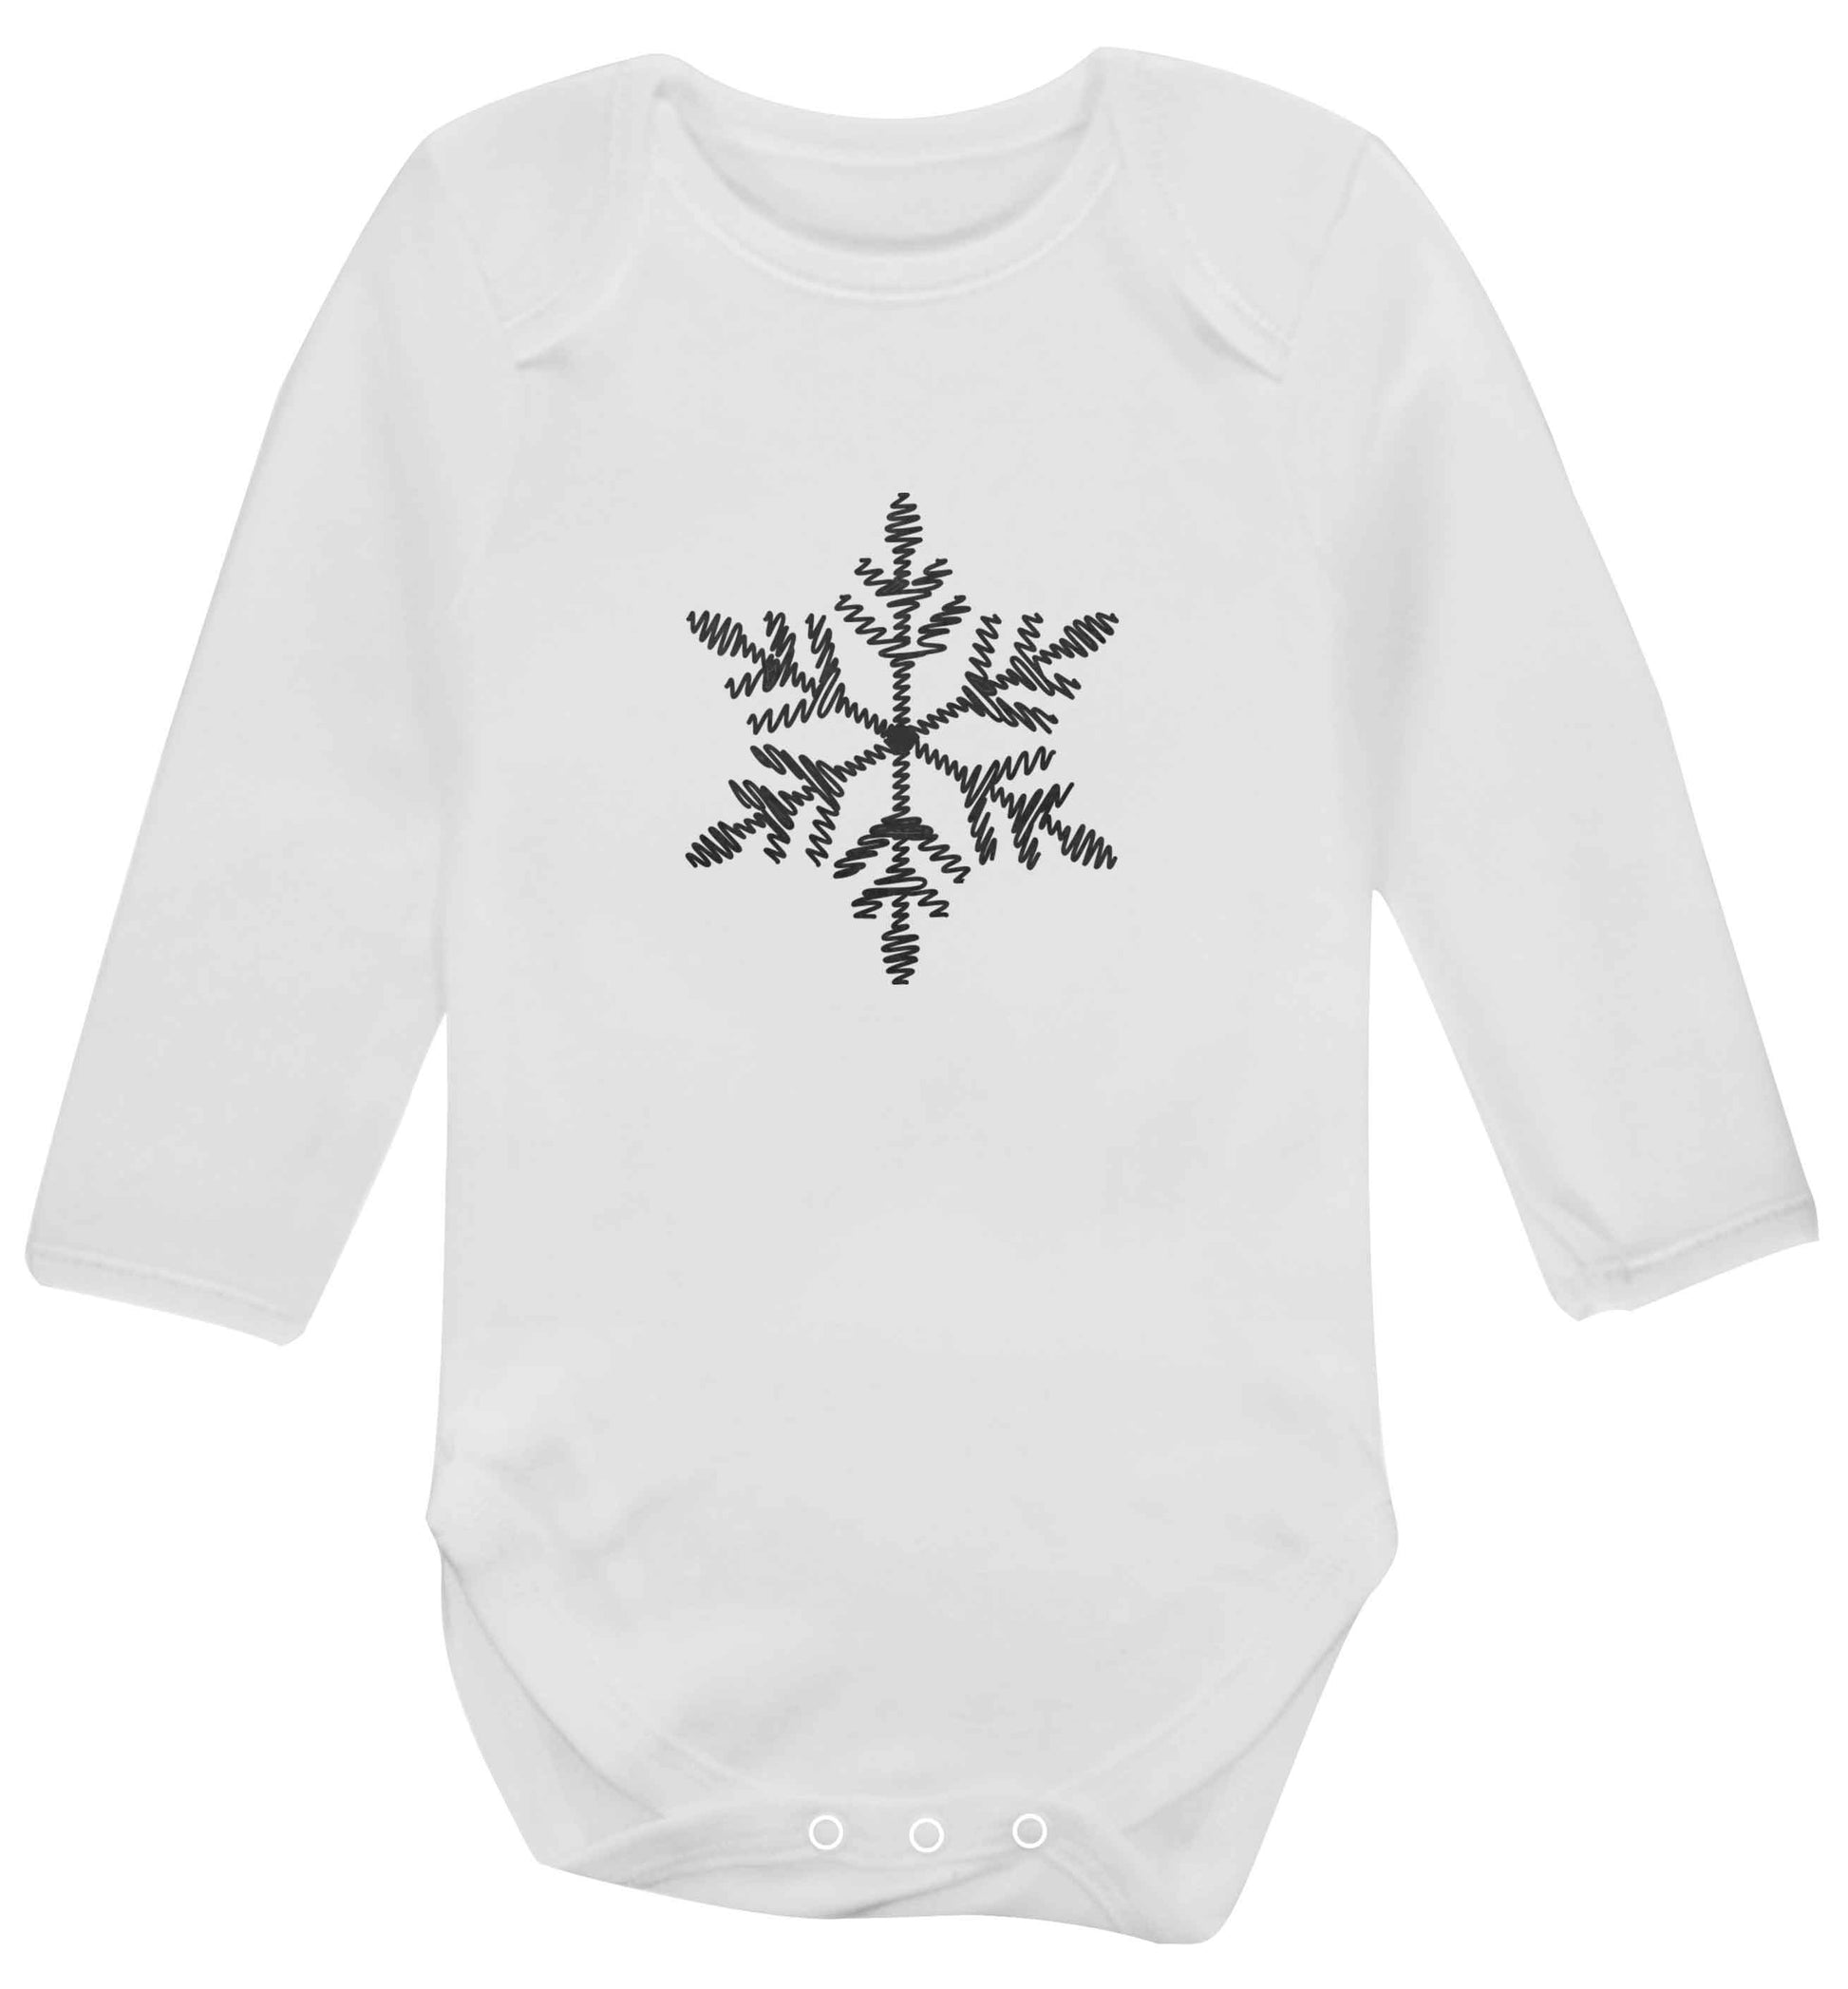 Snowflake baby vest long sleeved white 6-12 months